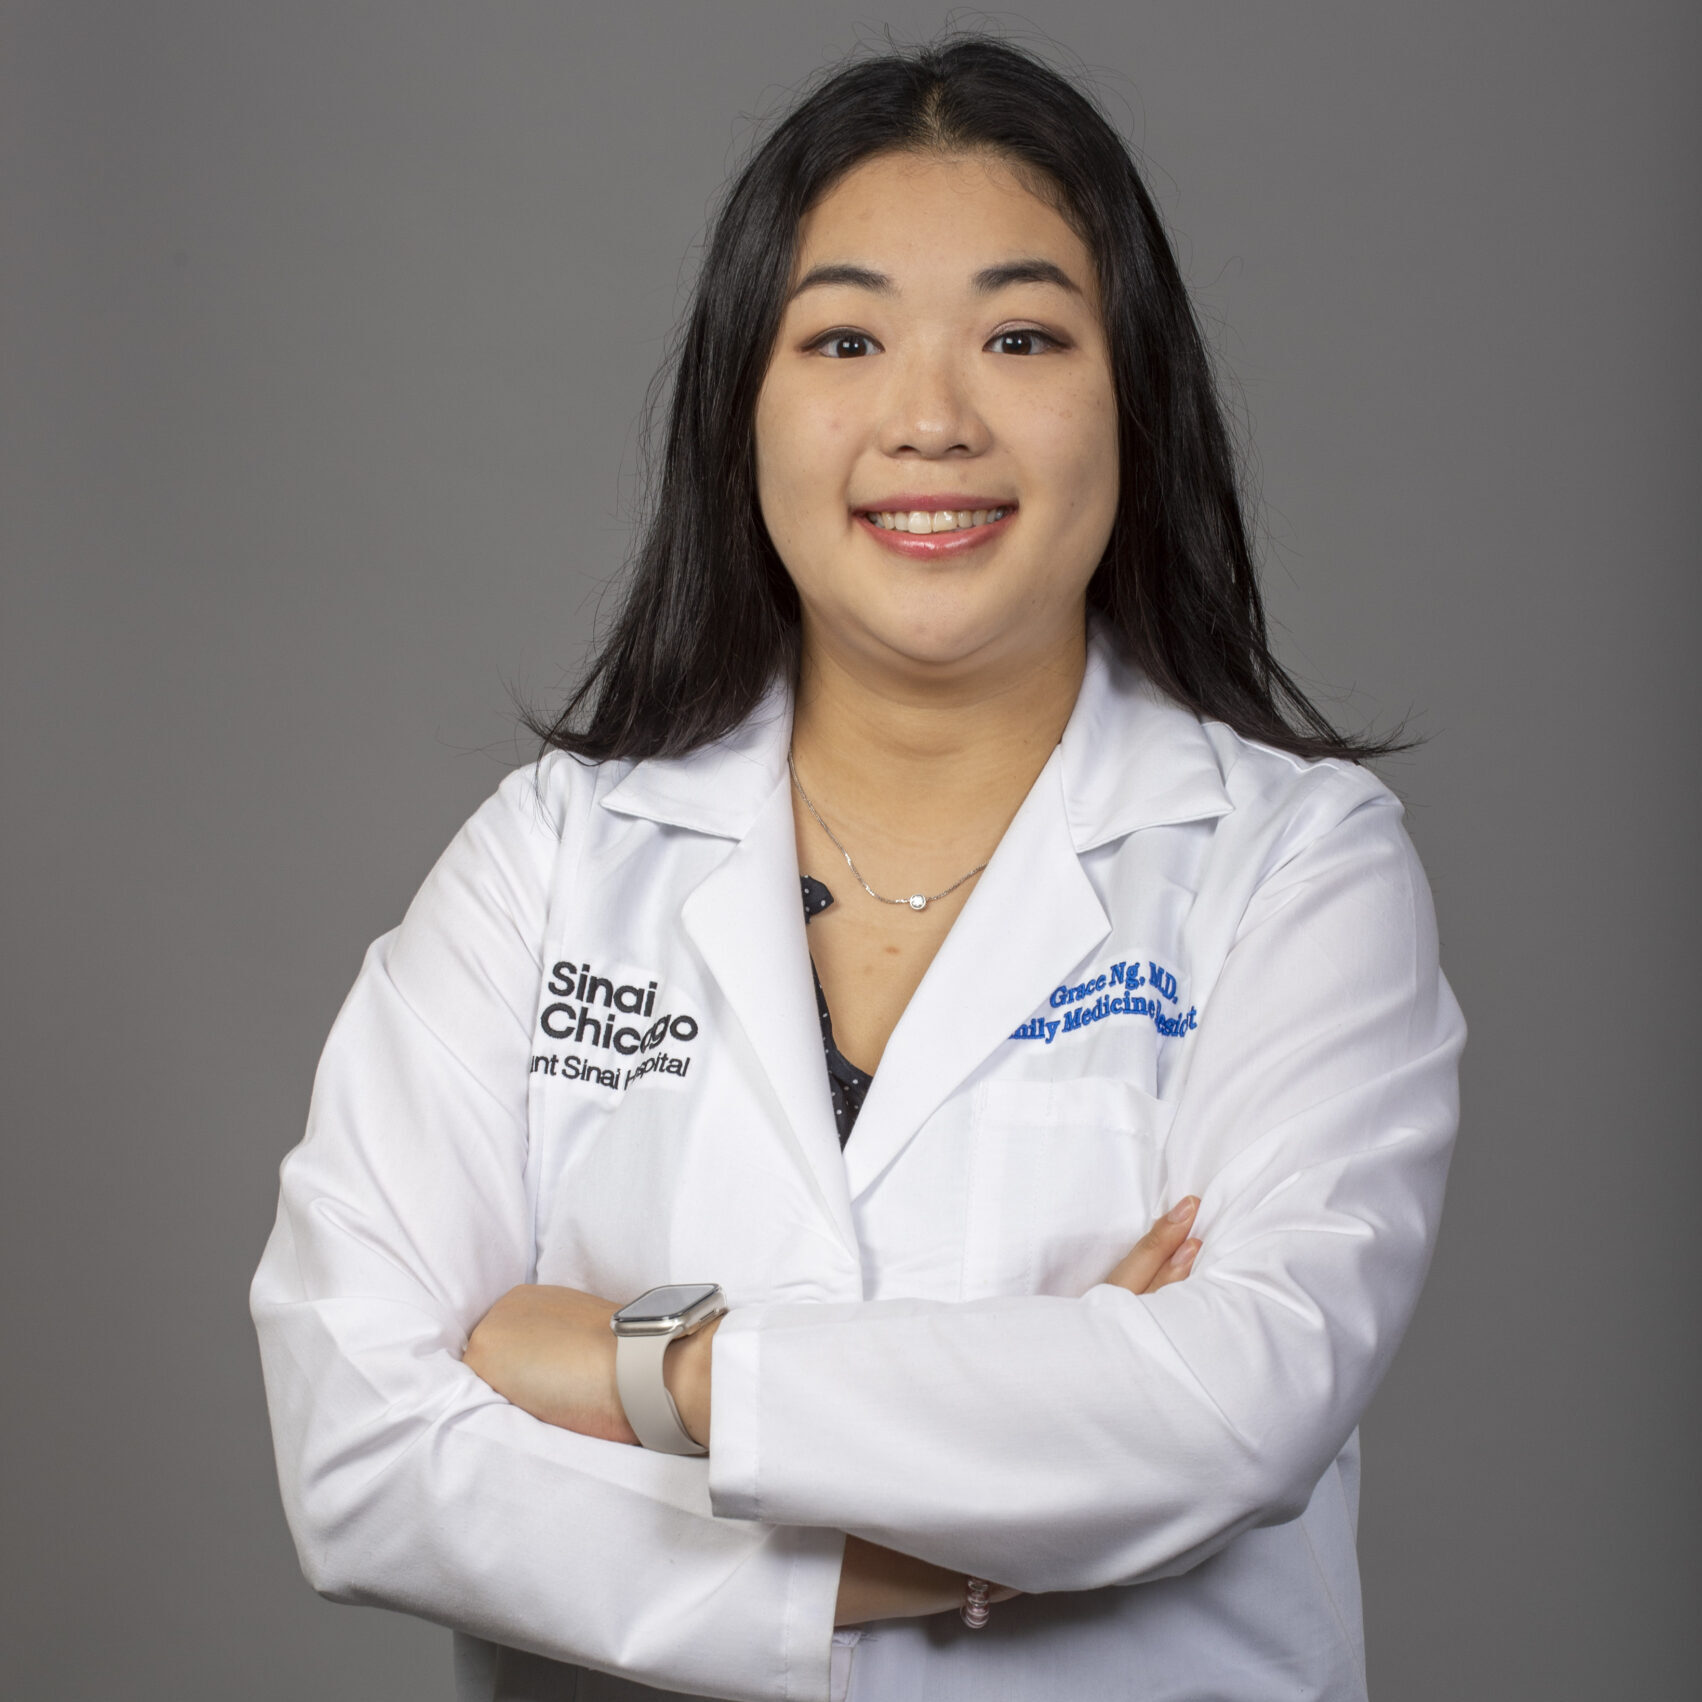 Grace Ng, MD, Sinai Chicago, August 17, 2022